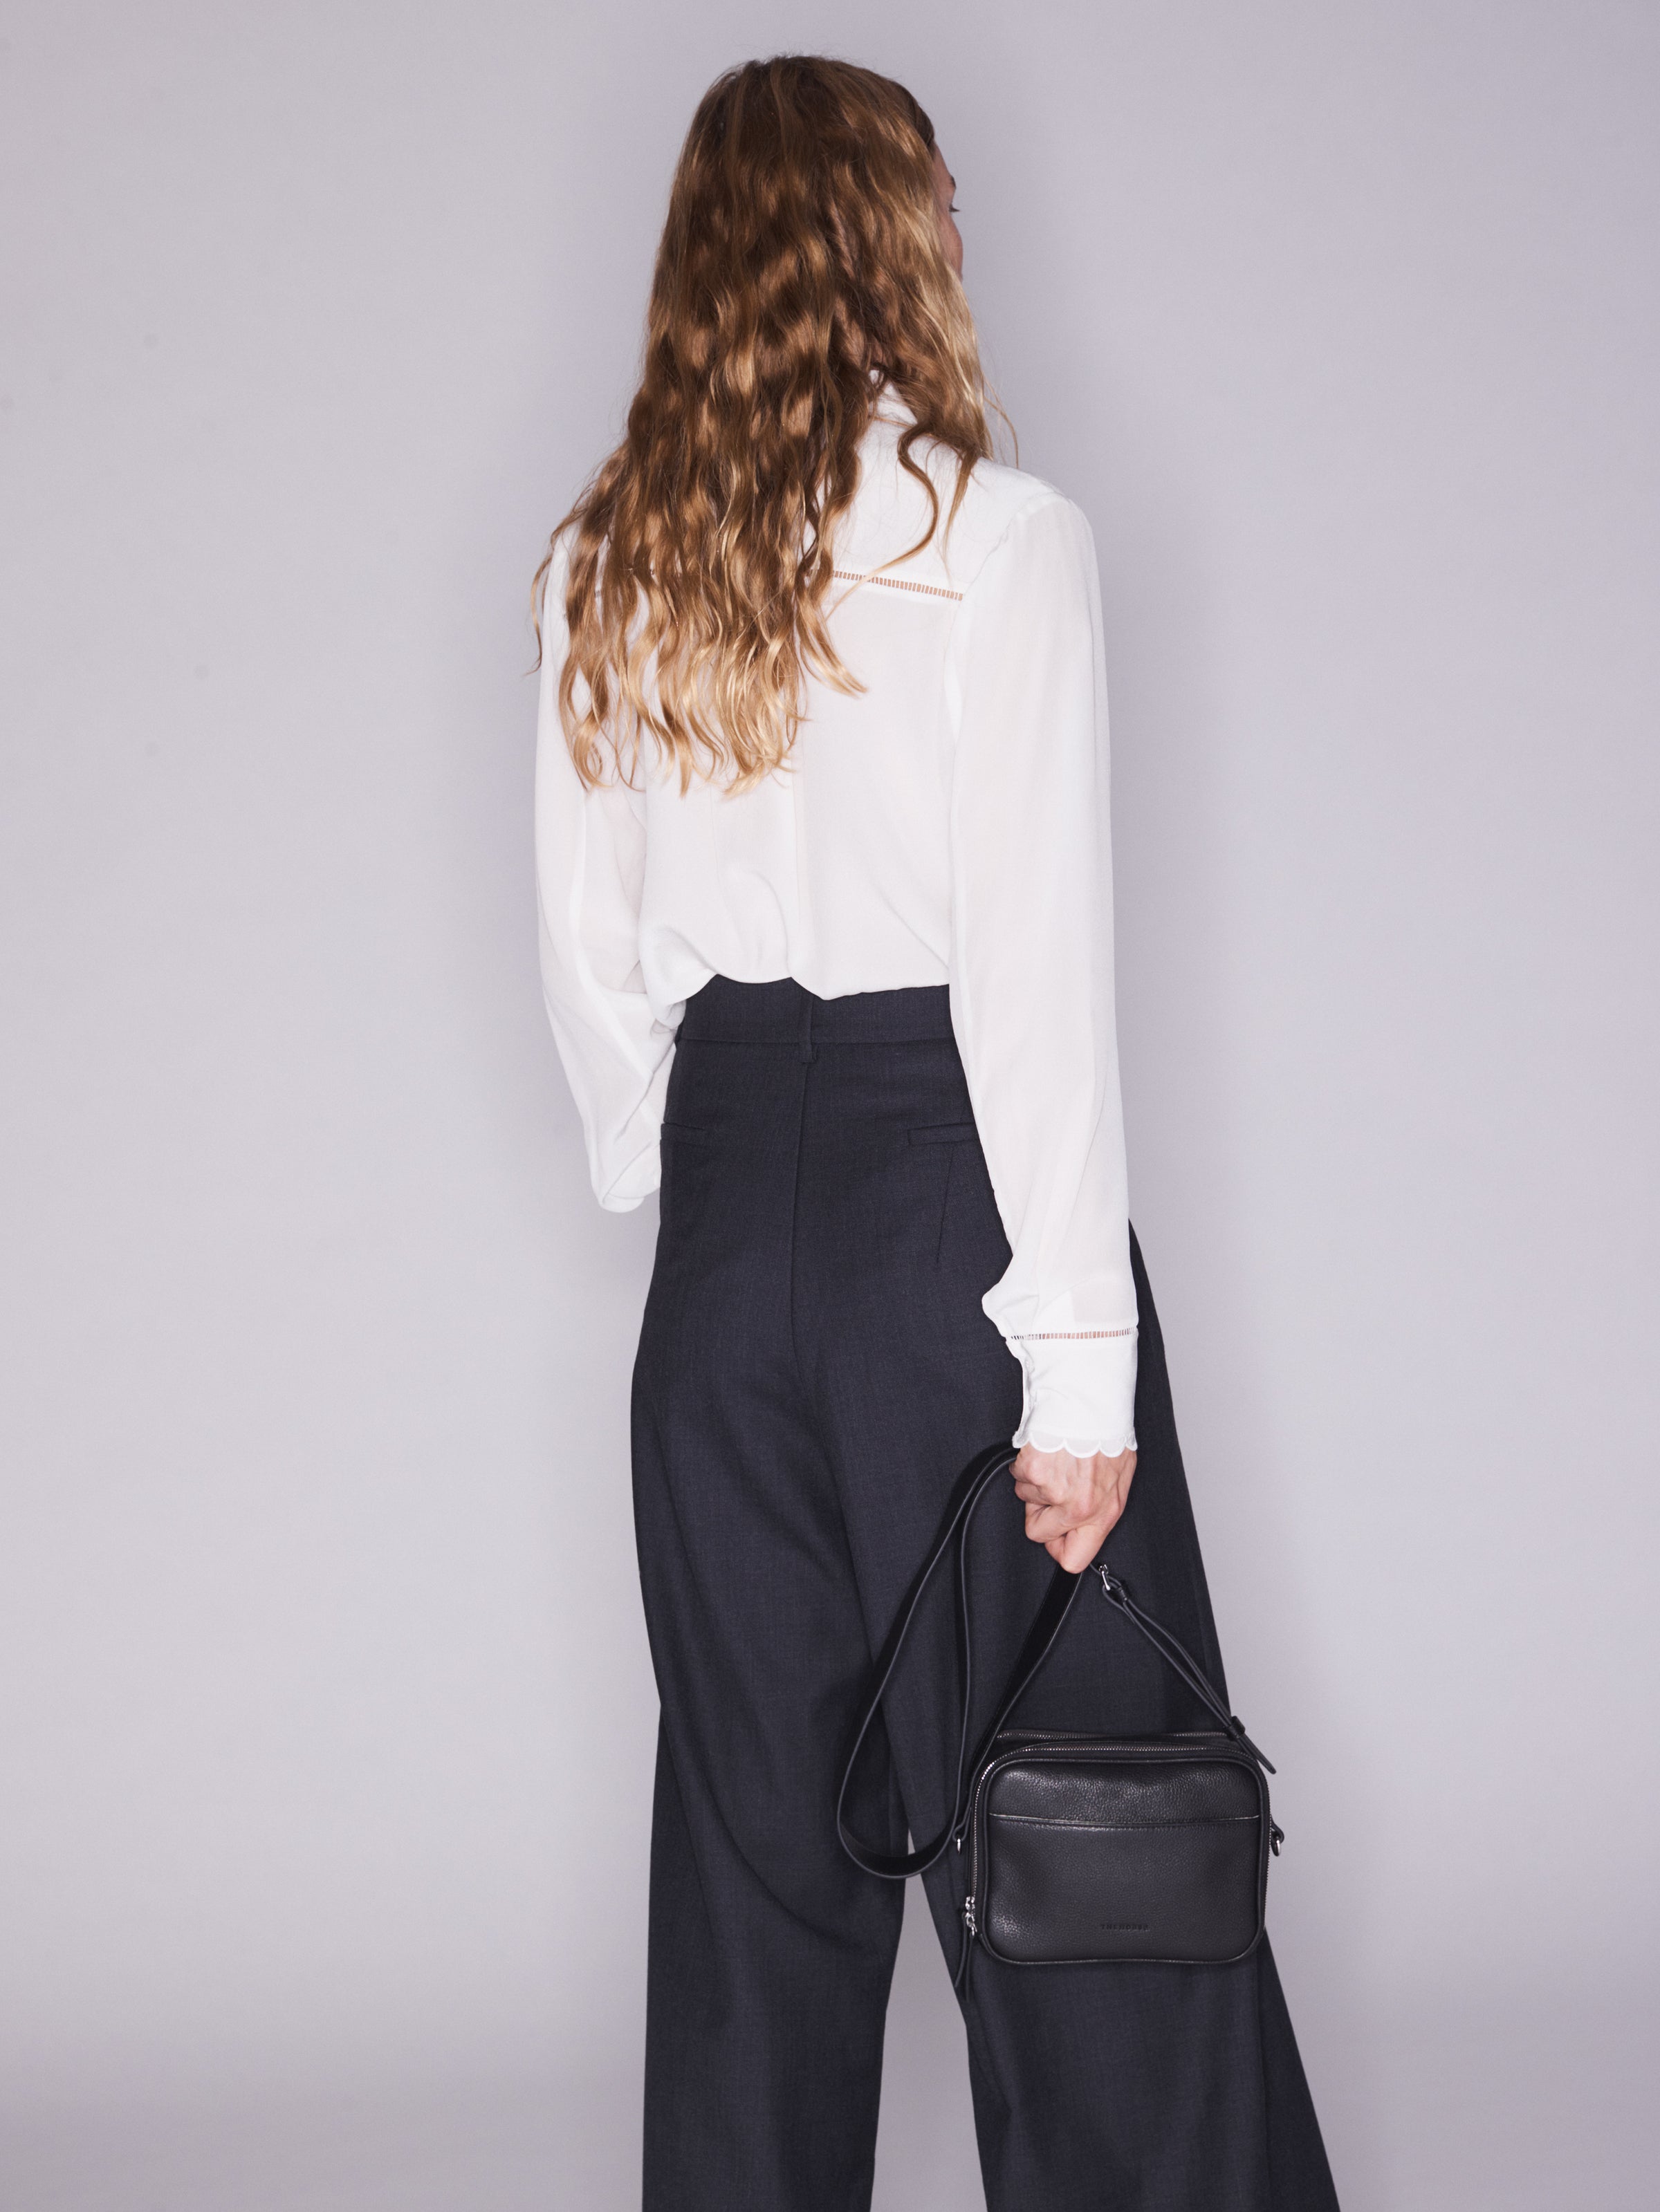 Dylan Crossbody Bag in Black Leather | The Horse